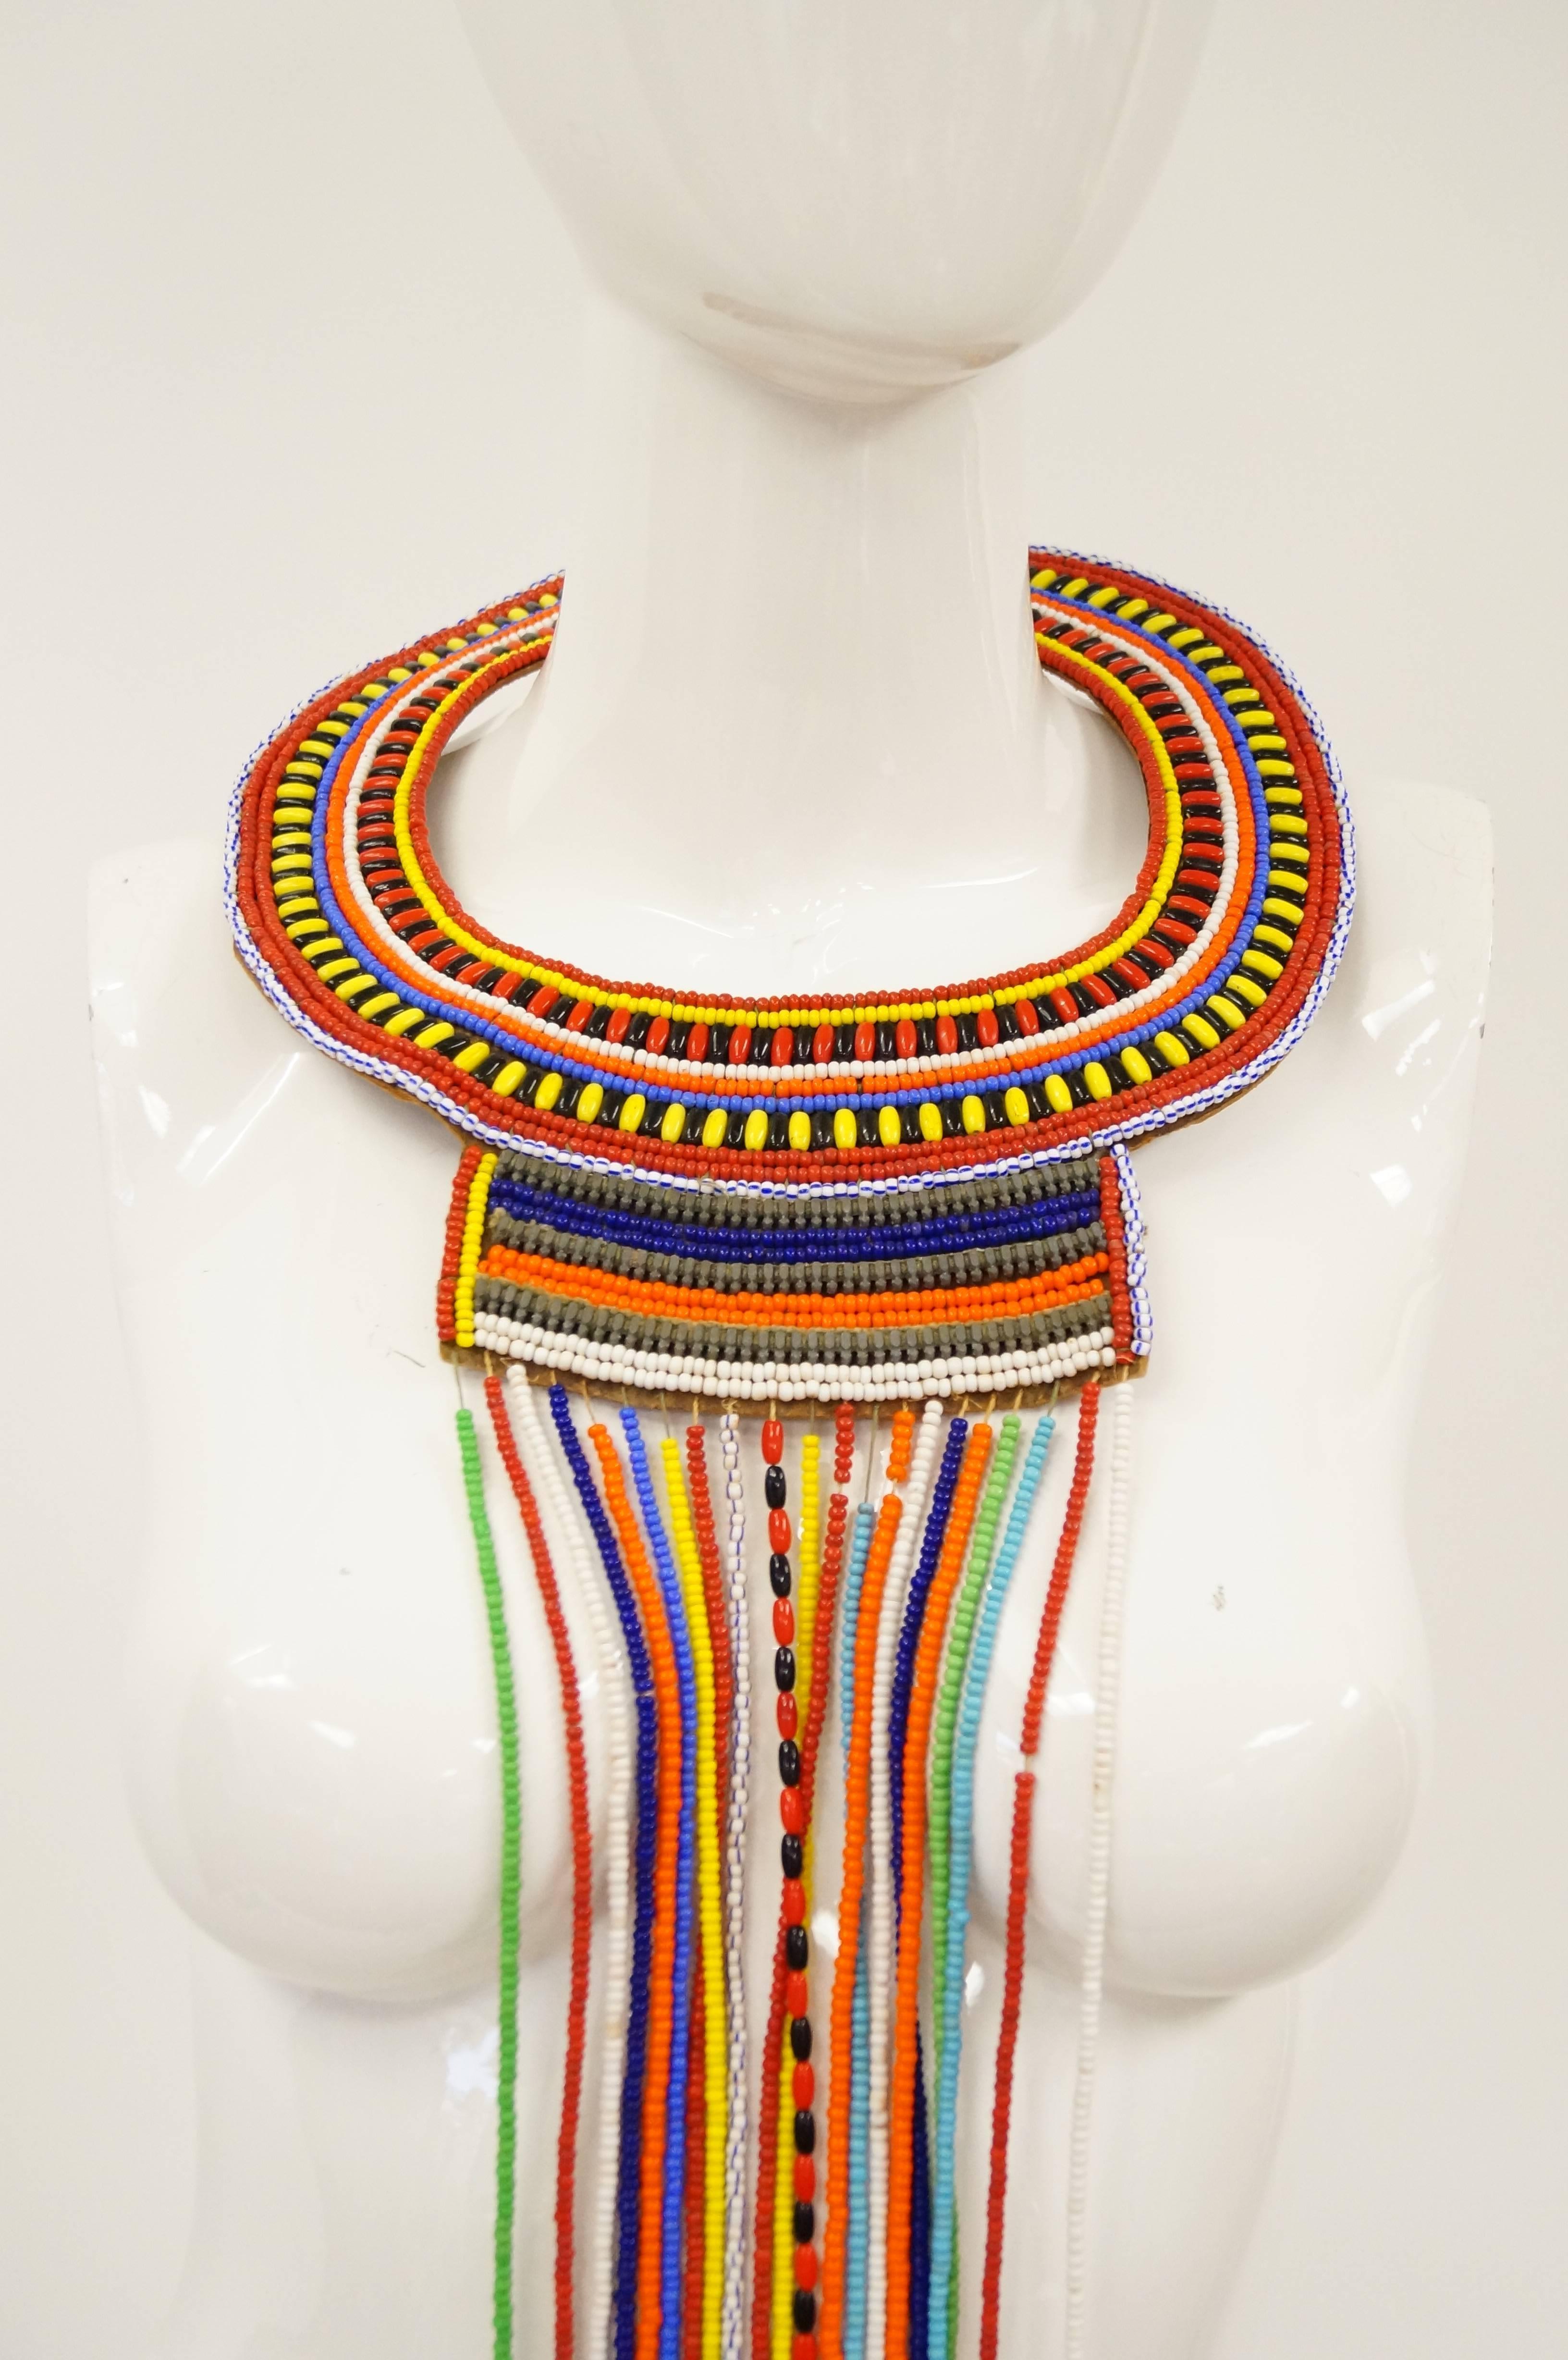 Statement tribal beaded neck piece. Multi colored glass beads on a leather backer. 

18" Neck
41" Length